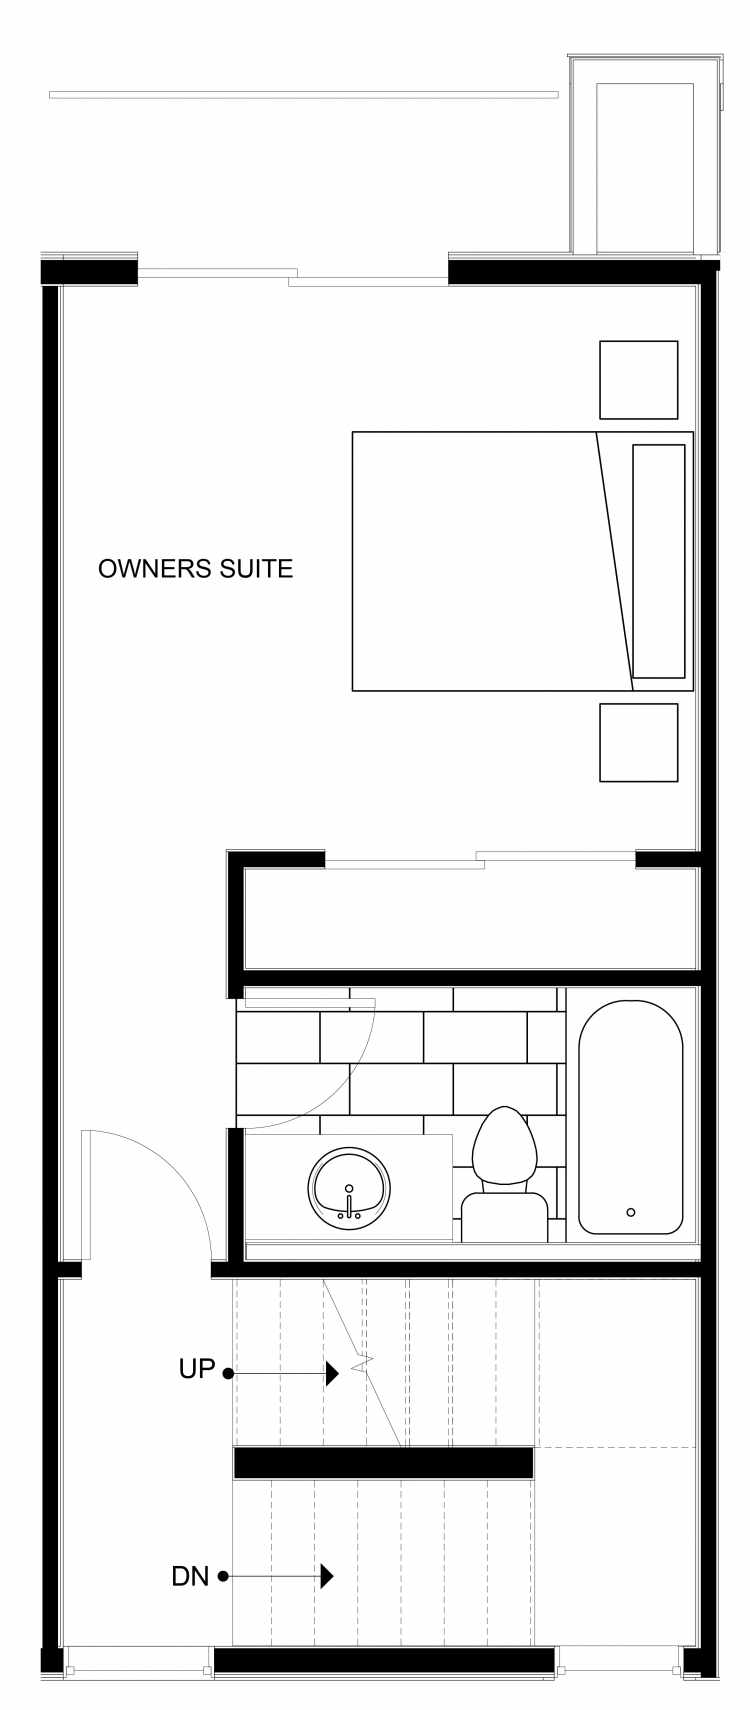 Fourth Floor Plan of 1541 Grandview Pl E, One of the Larrabee Townhomes in Capitol Hill